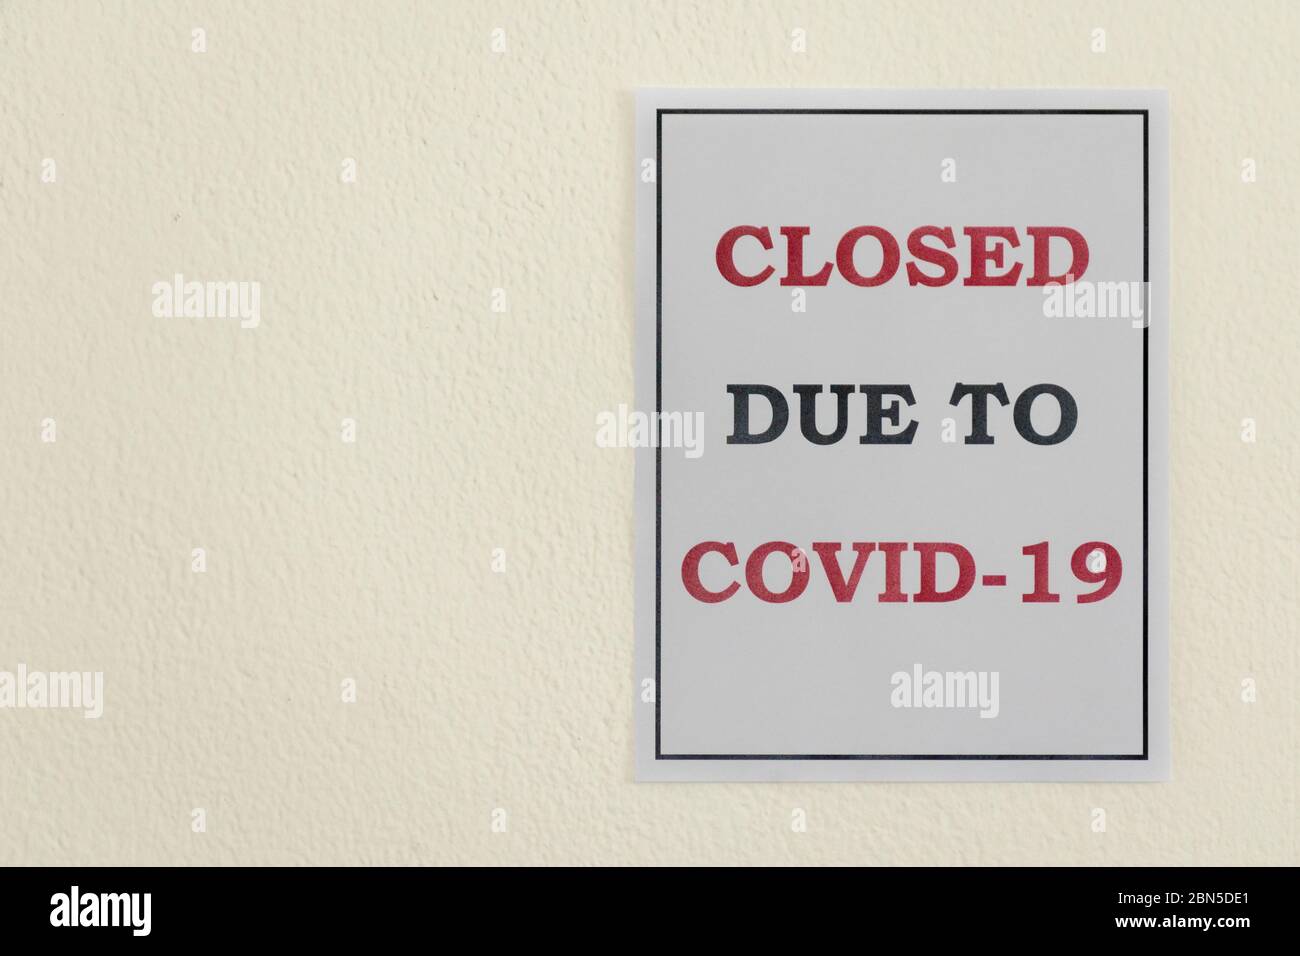 A 'Closed due to Covid-19' sign hangs on a wall during the Coronavirus Pandemic Stock Photo